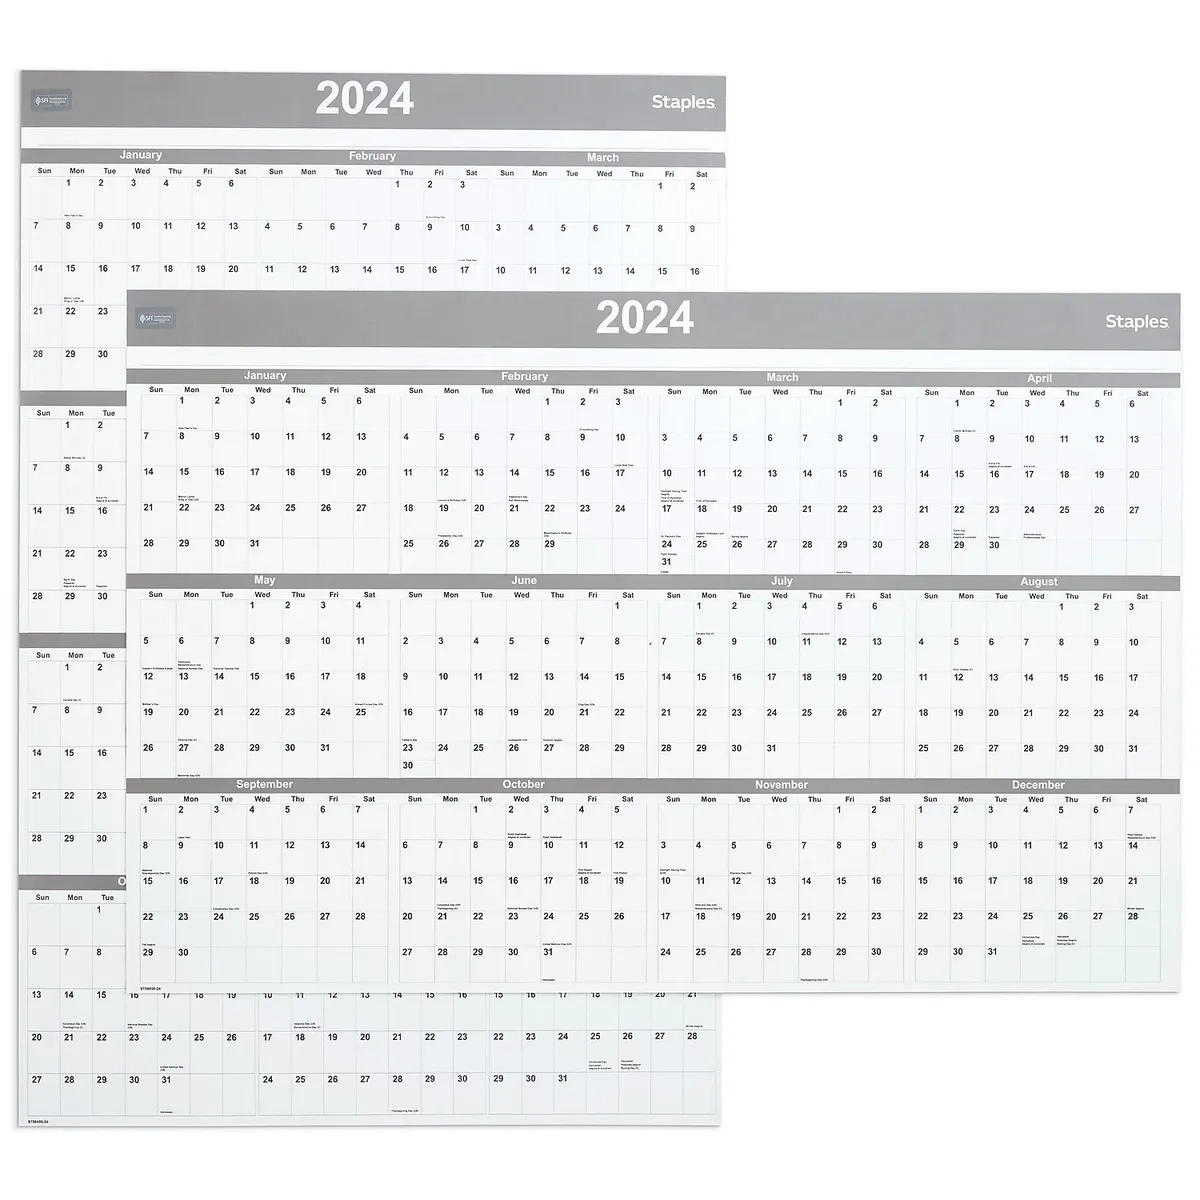 2024 Staples 48&amp;quot; X 32&amp;quot; Dry Erase Wall Calendar Gray/White (St58450 pertaining to Free Printable Bic Calendar 2024